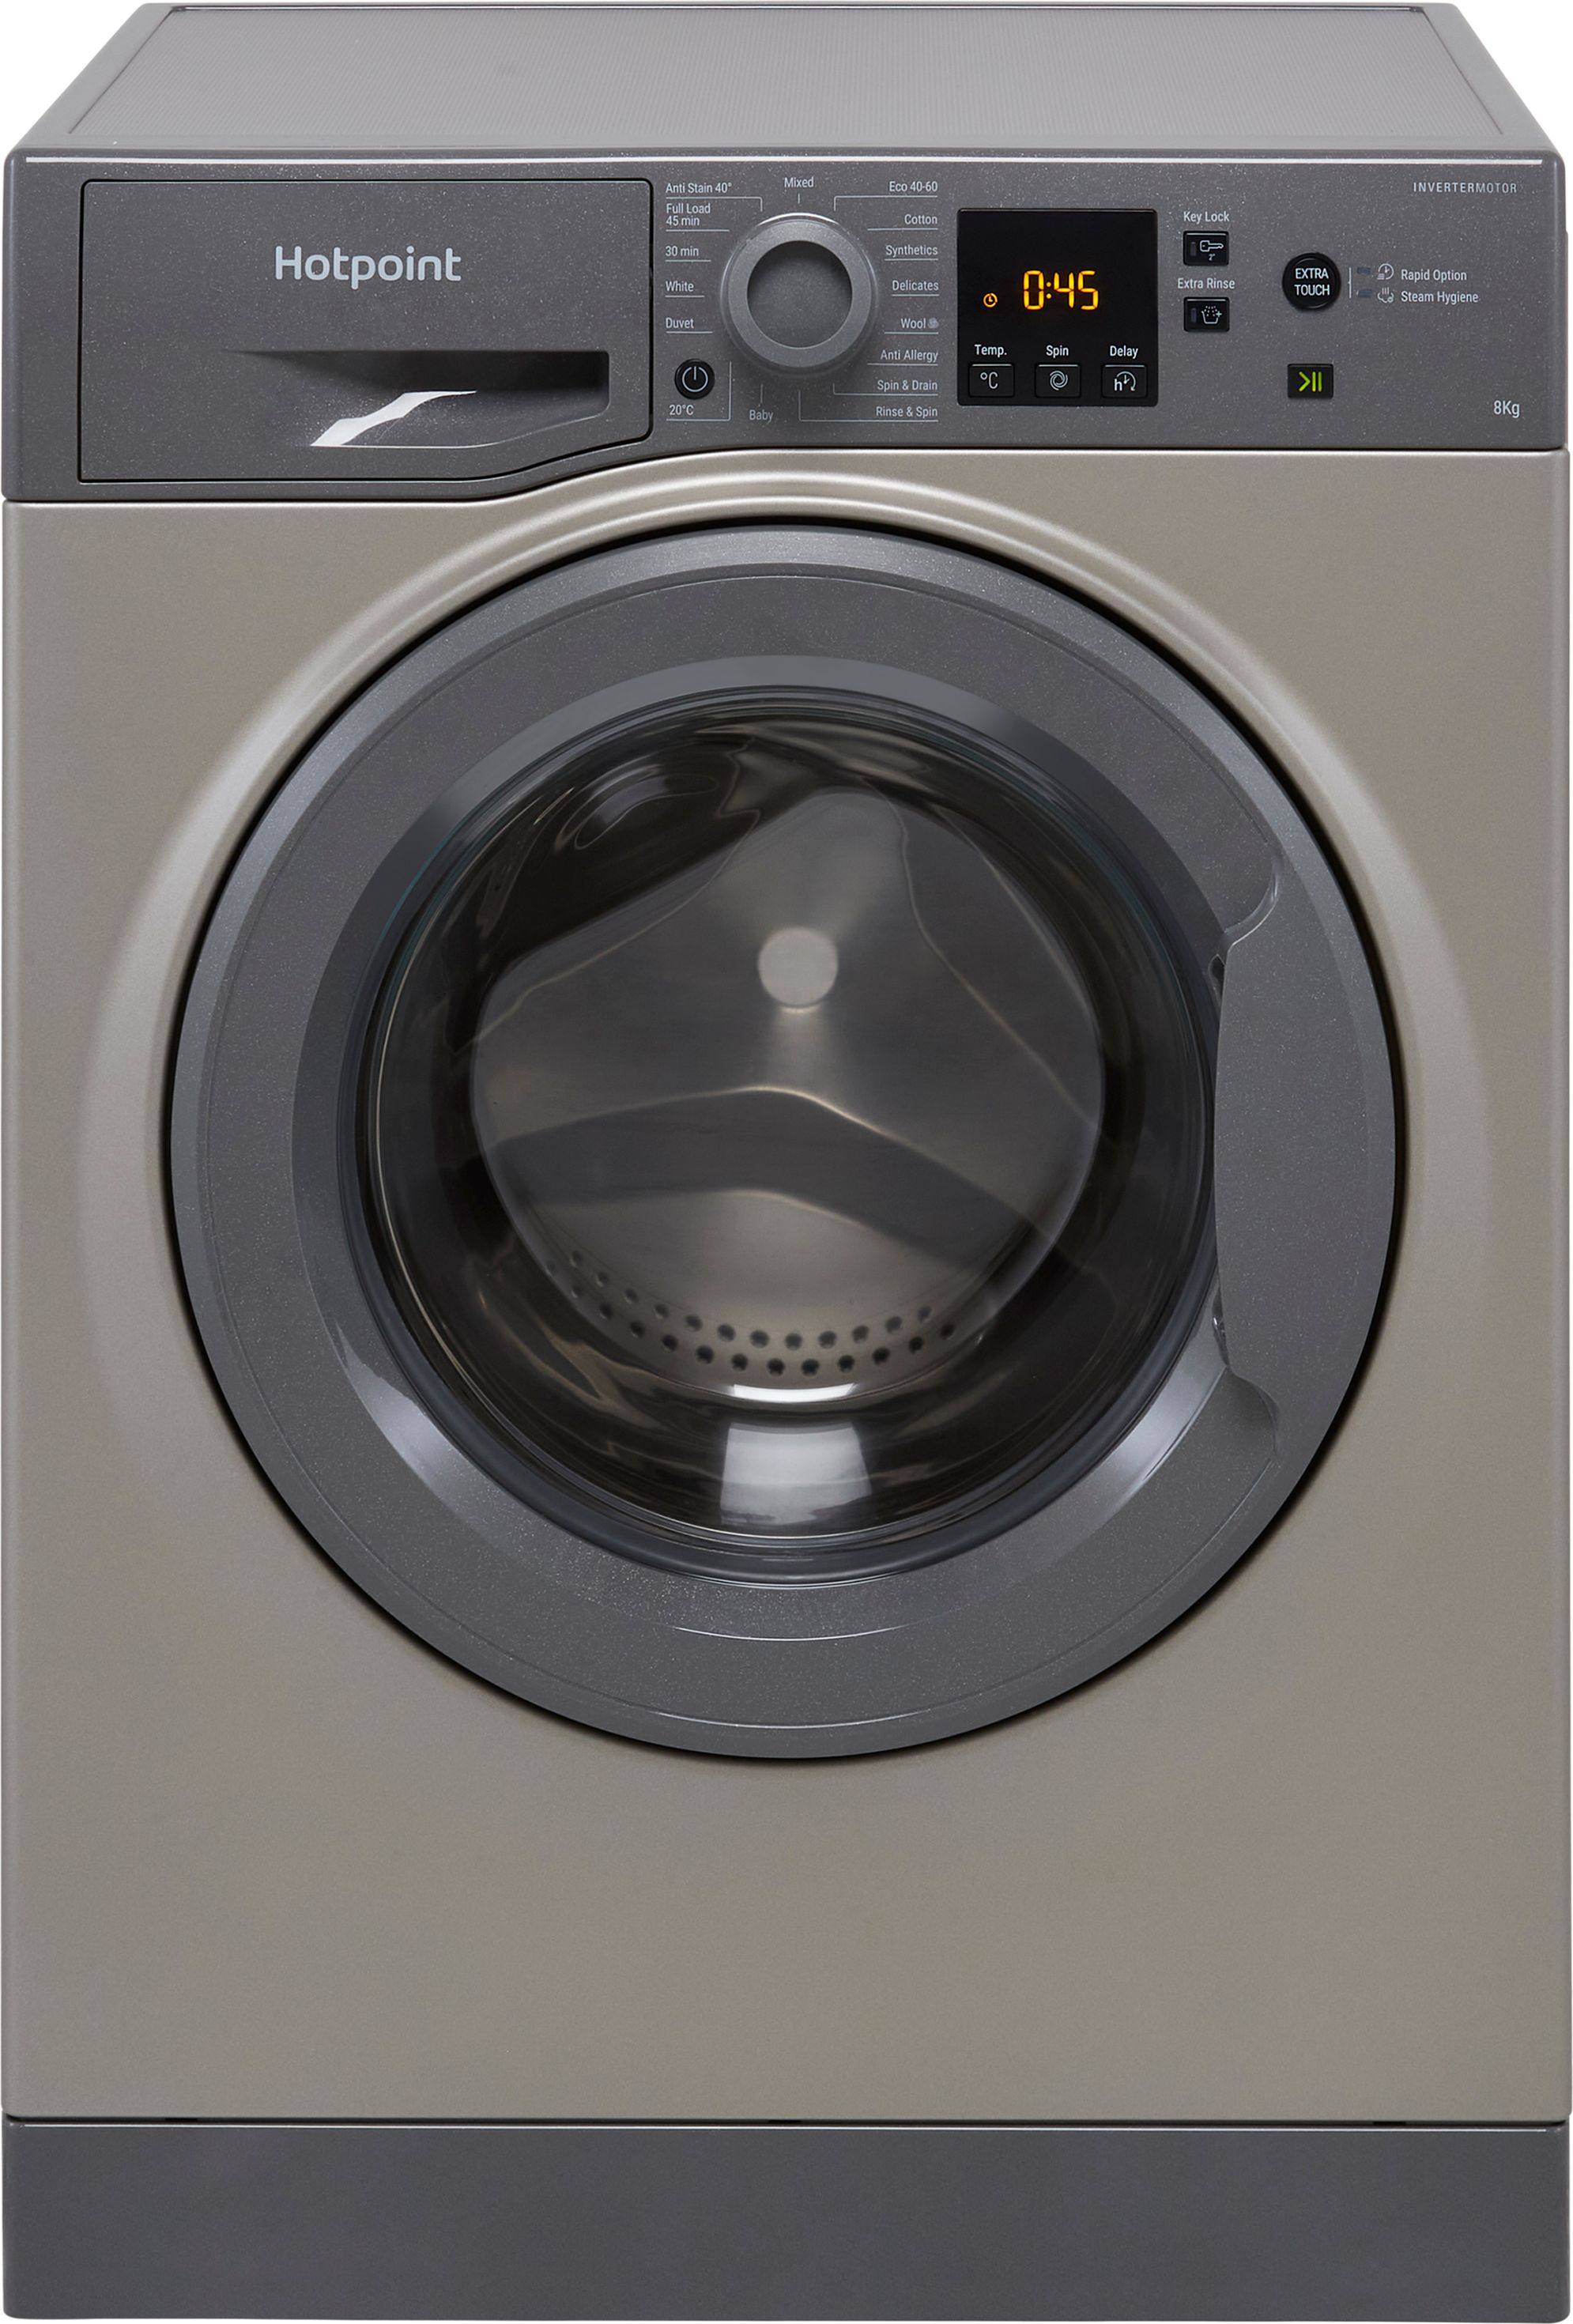 Hotpoint NSWM845CGGUKN 8kg Washing Machine with 1400 rpm - Graphite - B Rated, Silver